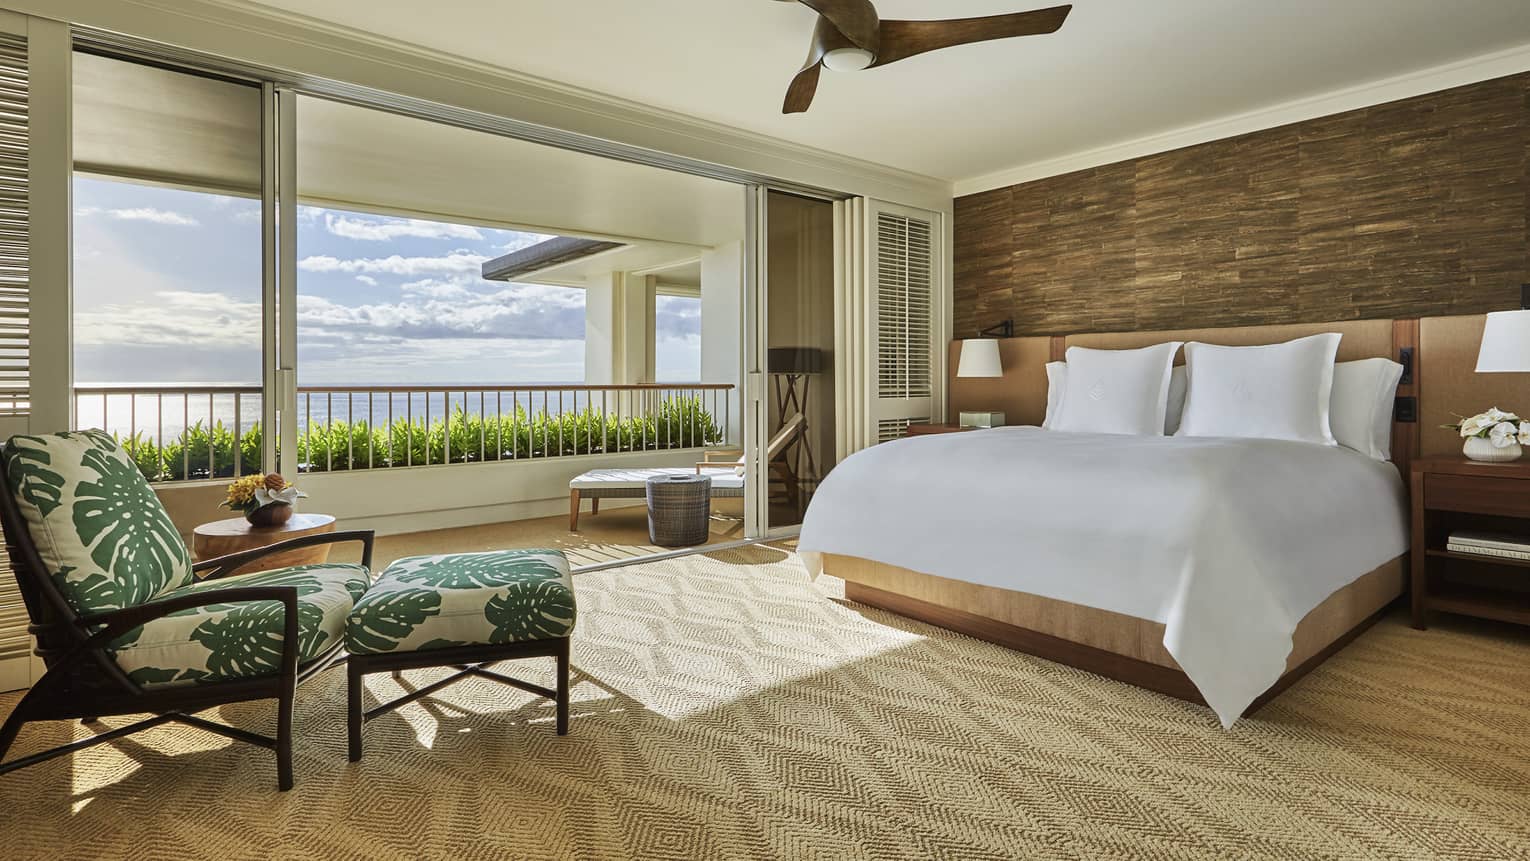 Hotel room bed and tropical print armchair by open air wall to patio, ocean view